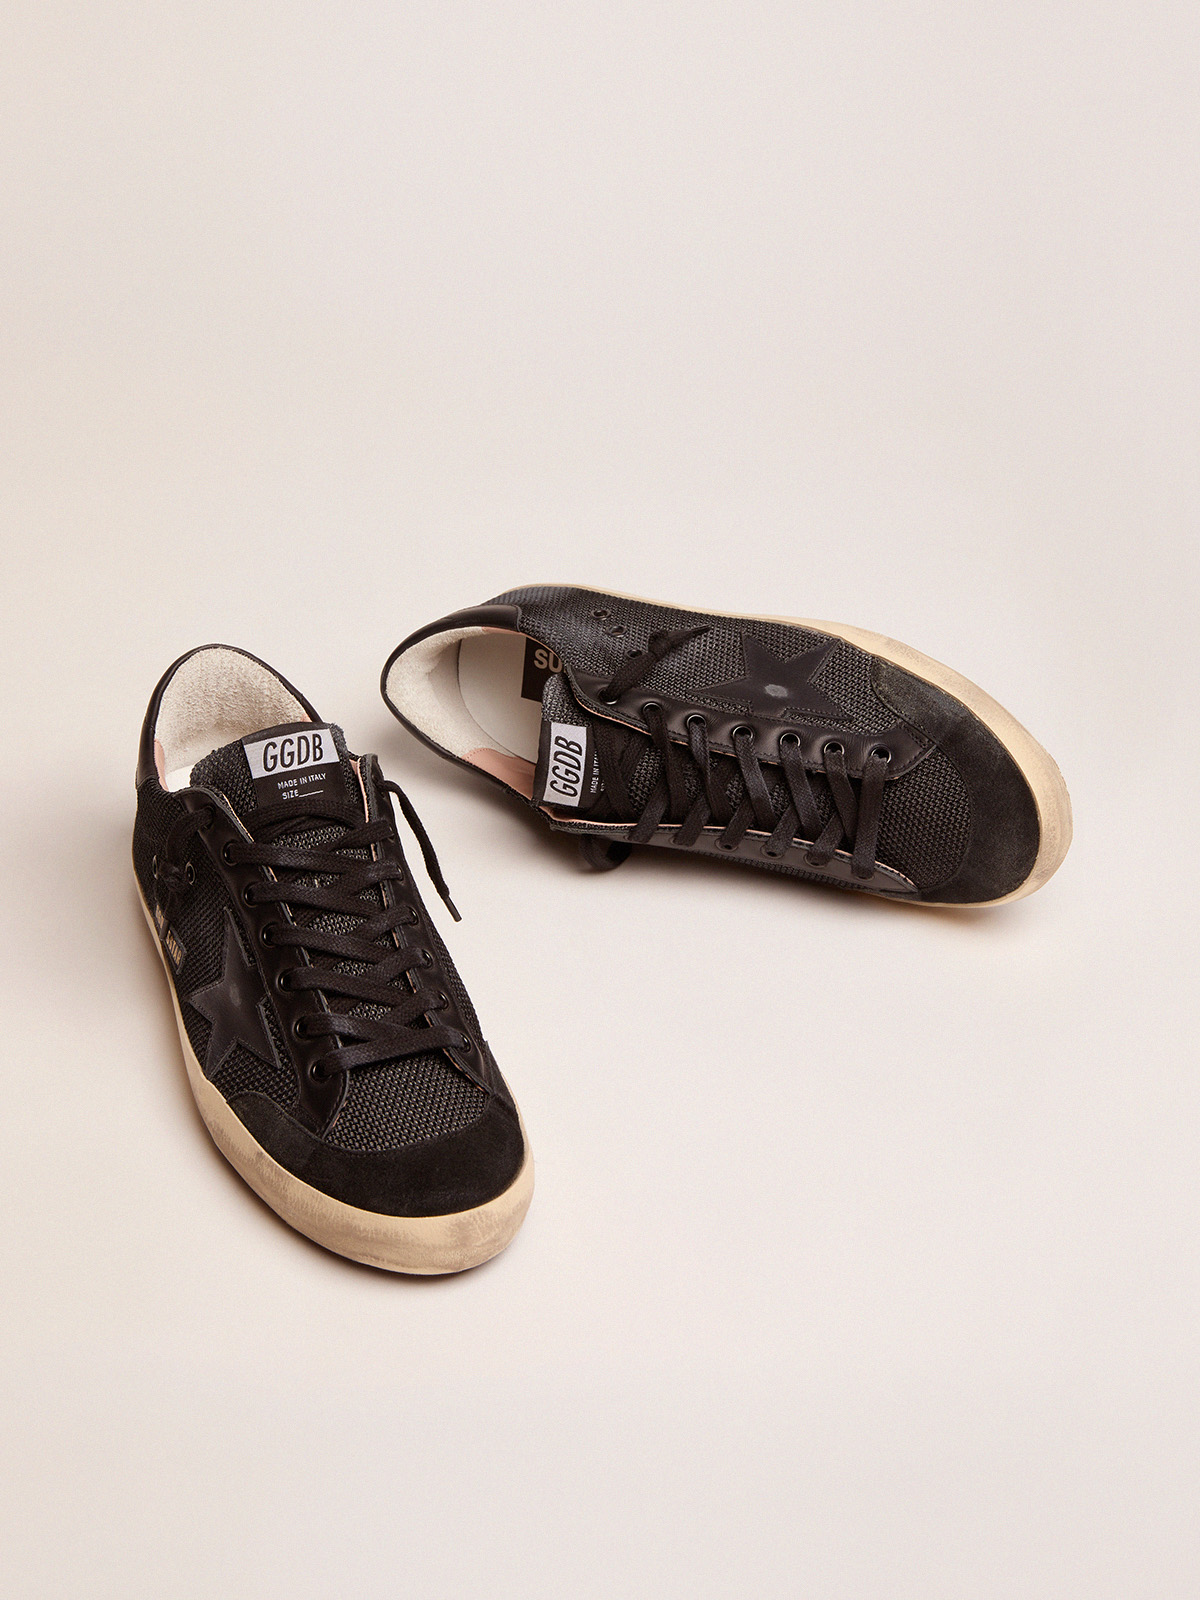 Super-Star Penstar sneakers in black mesh and leather | Golden Goose